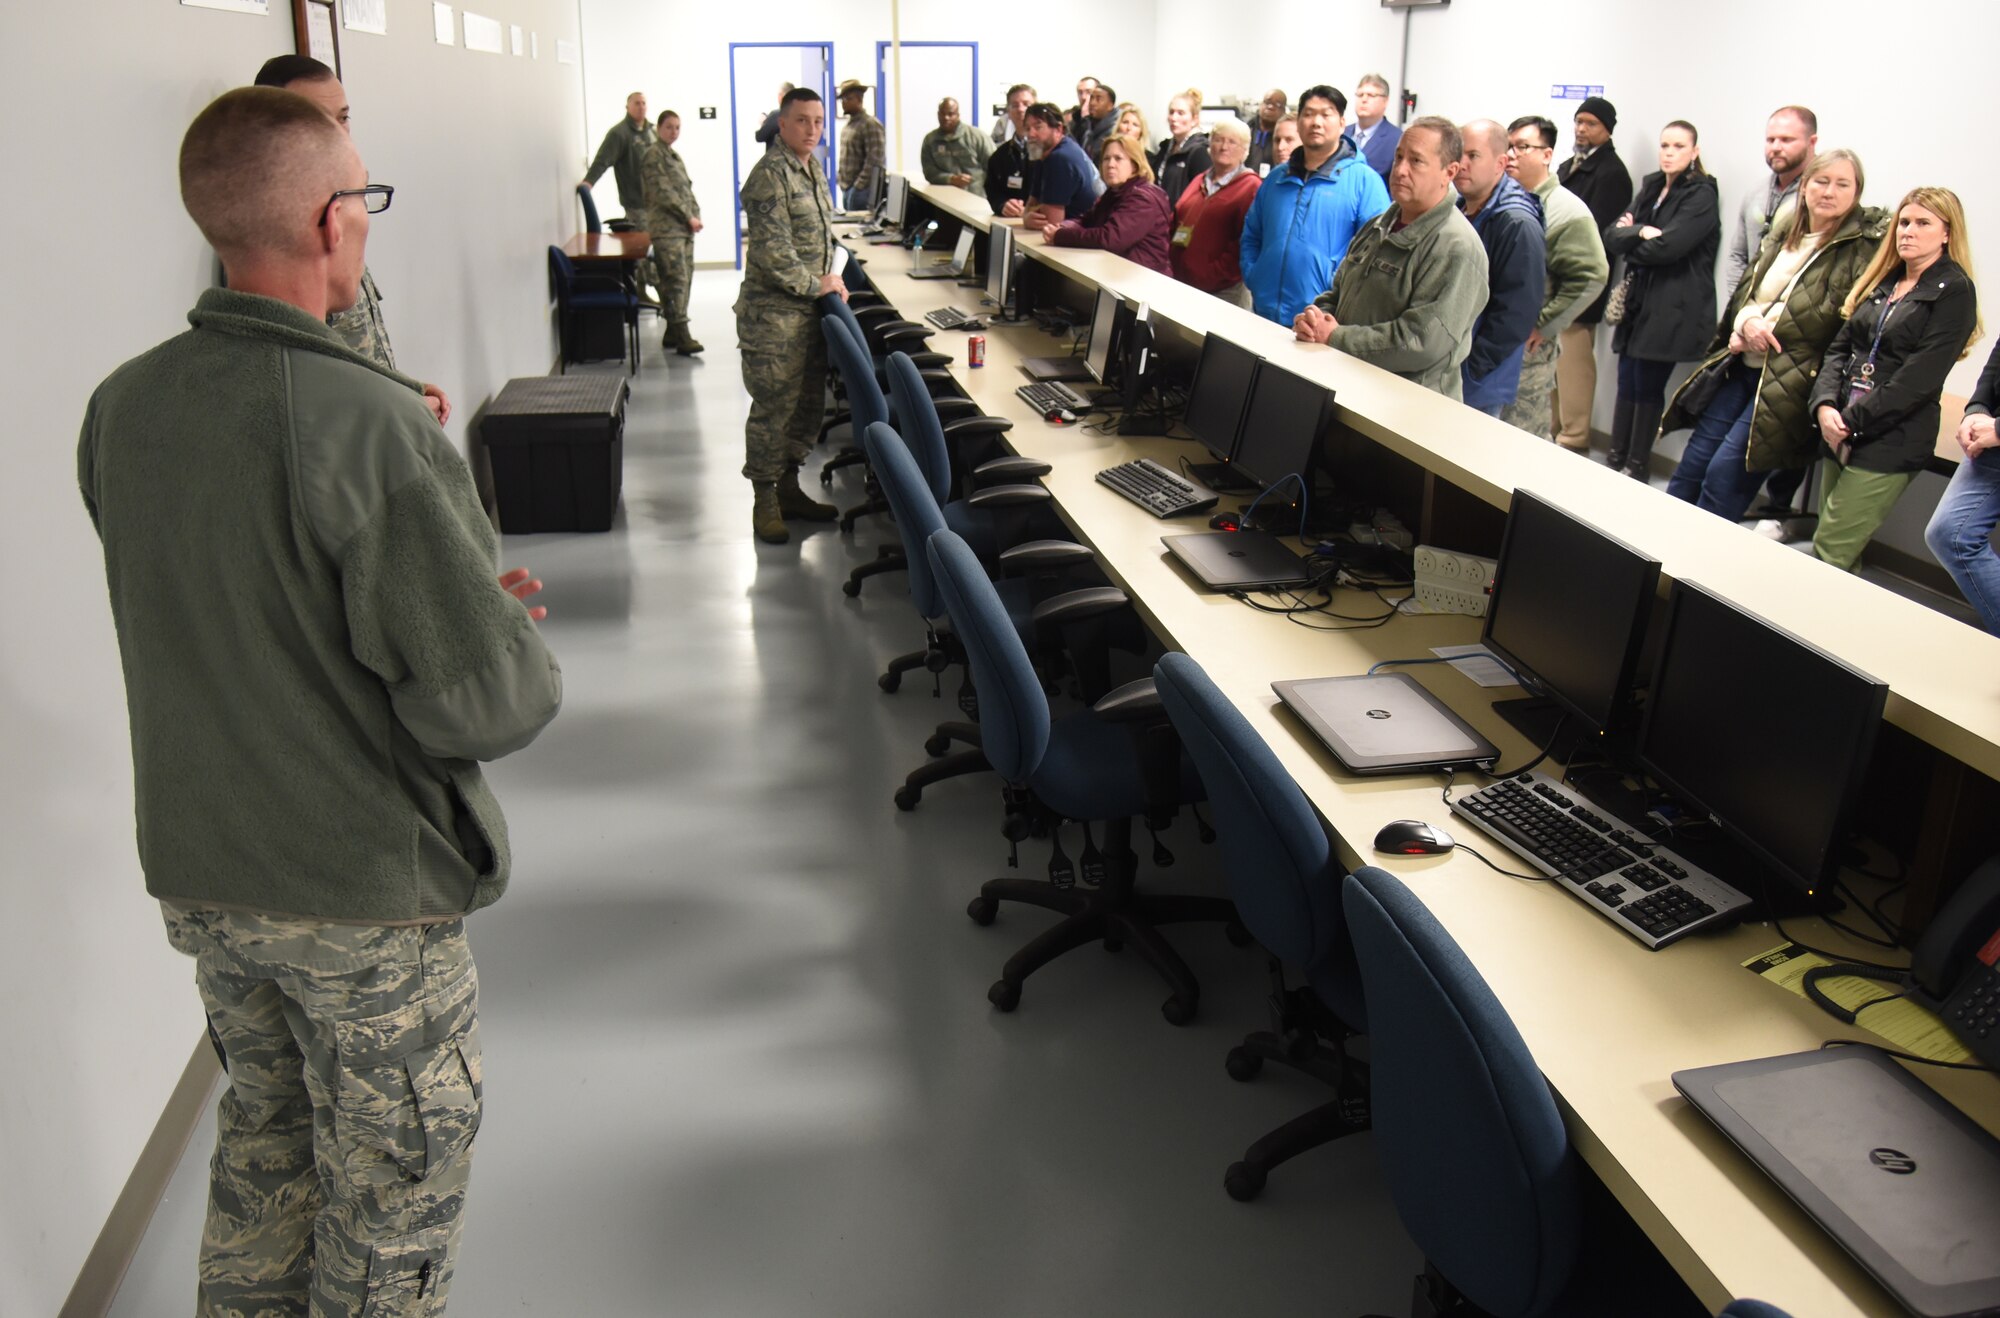 Tech. Sgt. Joshua Gale, non-commissioned officer in charge of terminal operations, discusses the Personal Deployment Function line for deployers and how they make sure their mobility folder is up-to-date for their deployment. (U.S. Air Force photos/Kelly White)